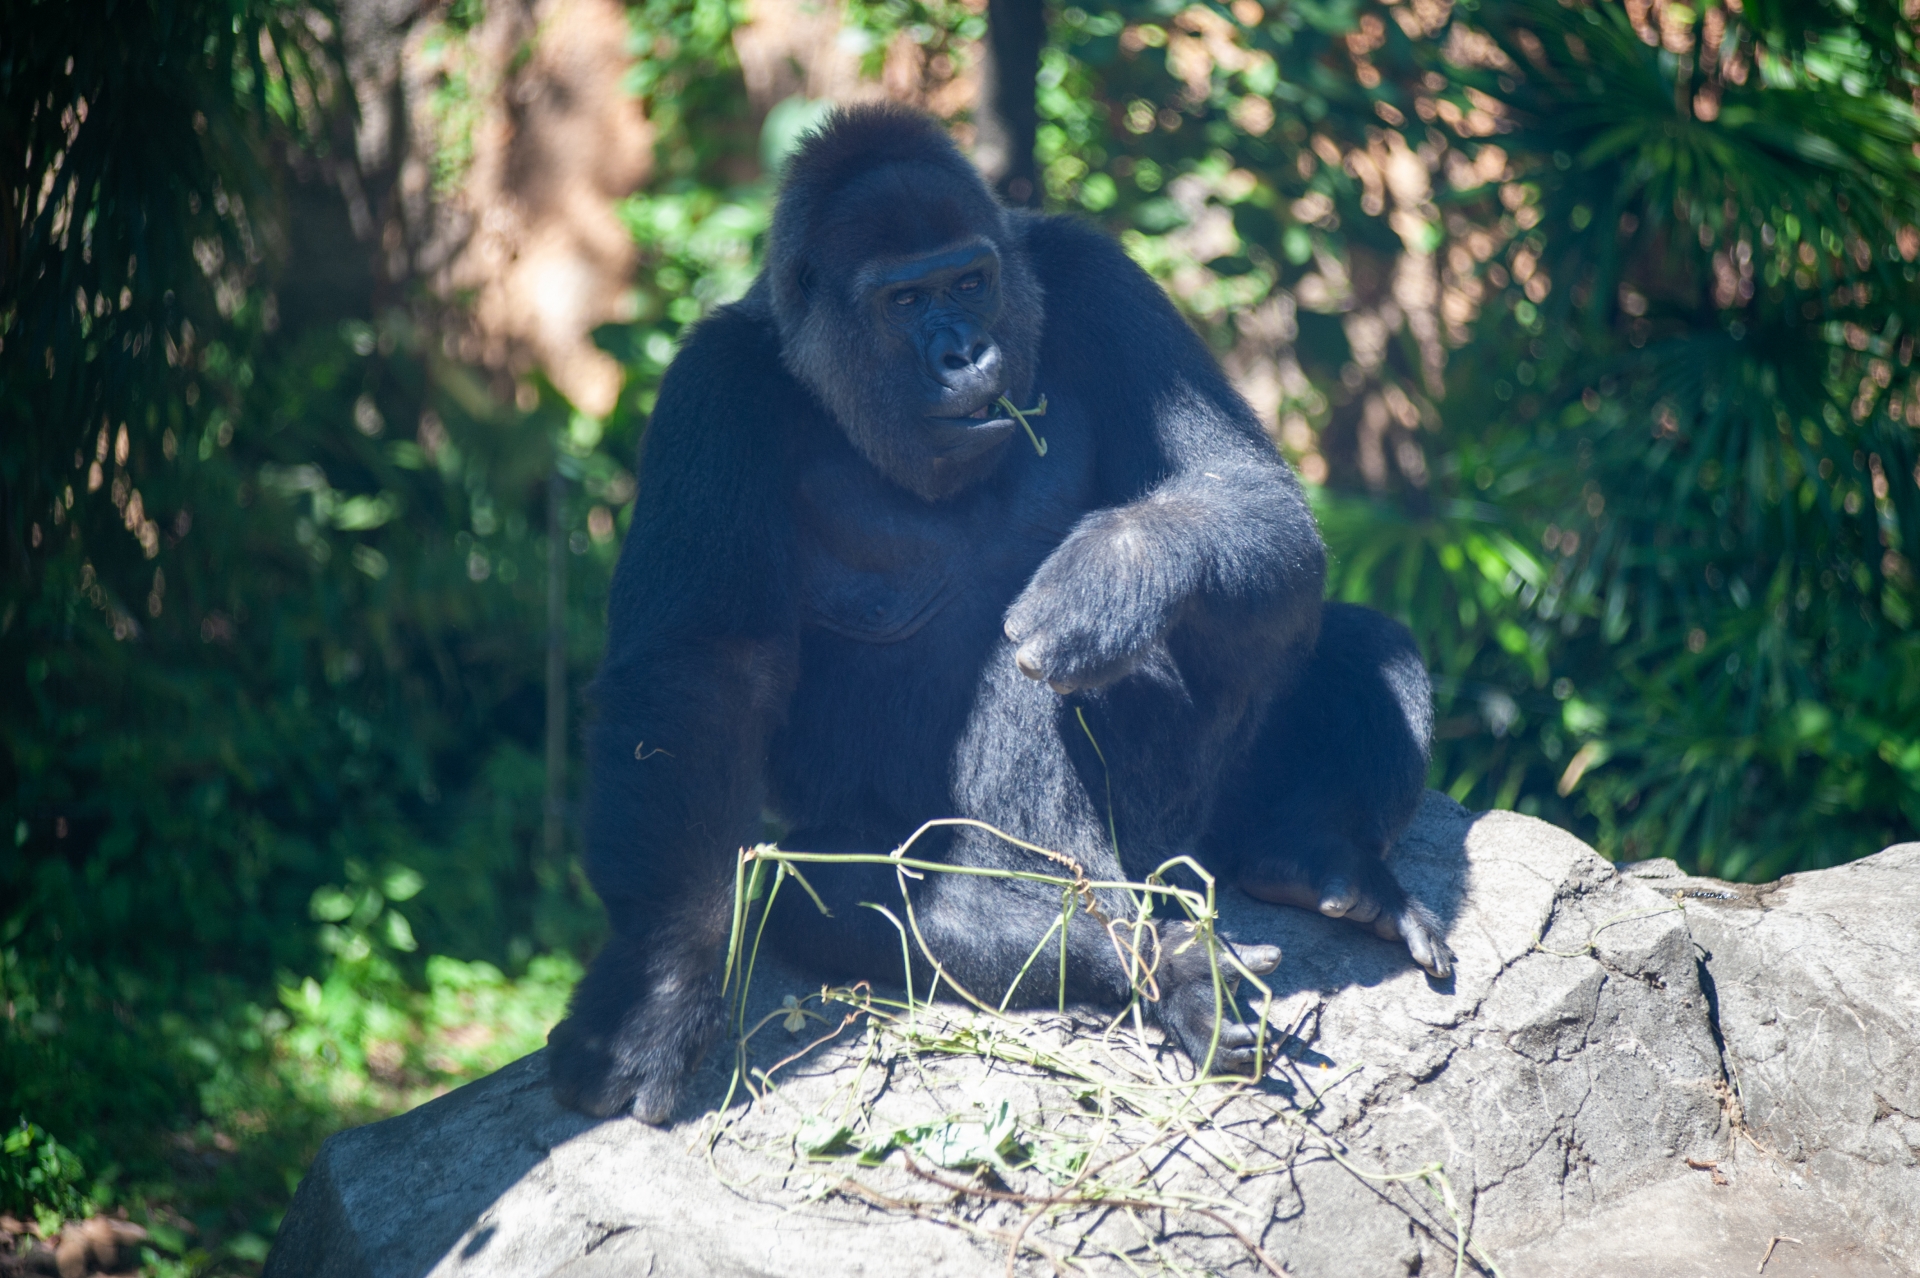 A gorilla is eating something on a rock.